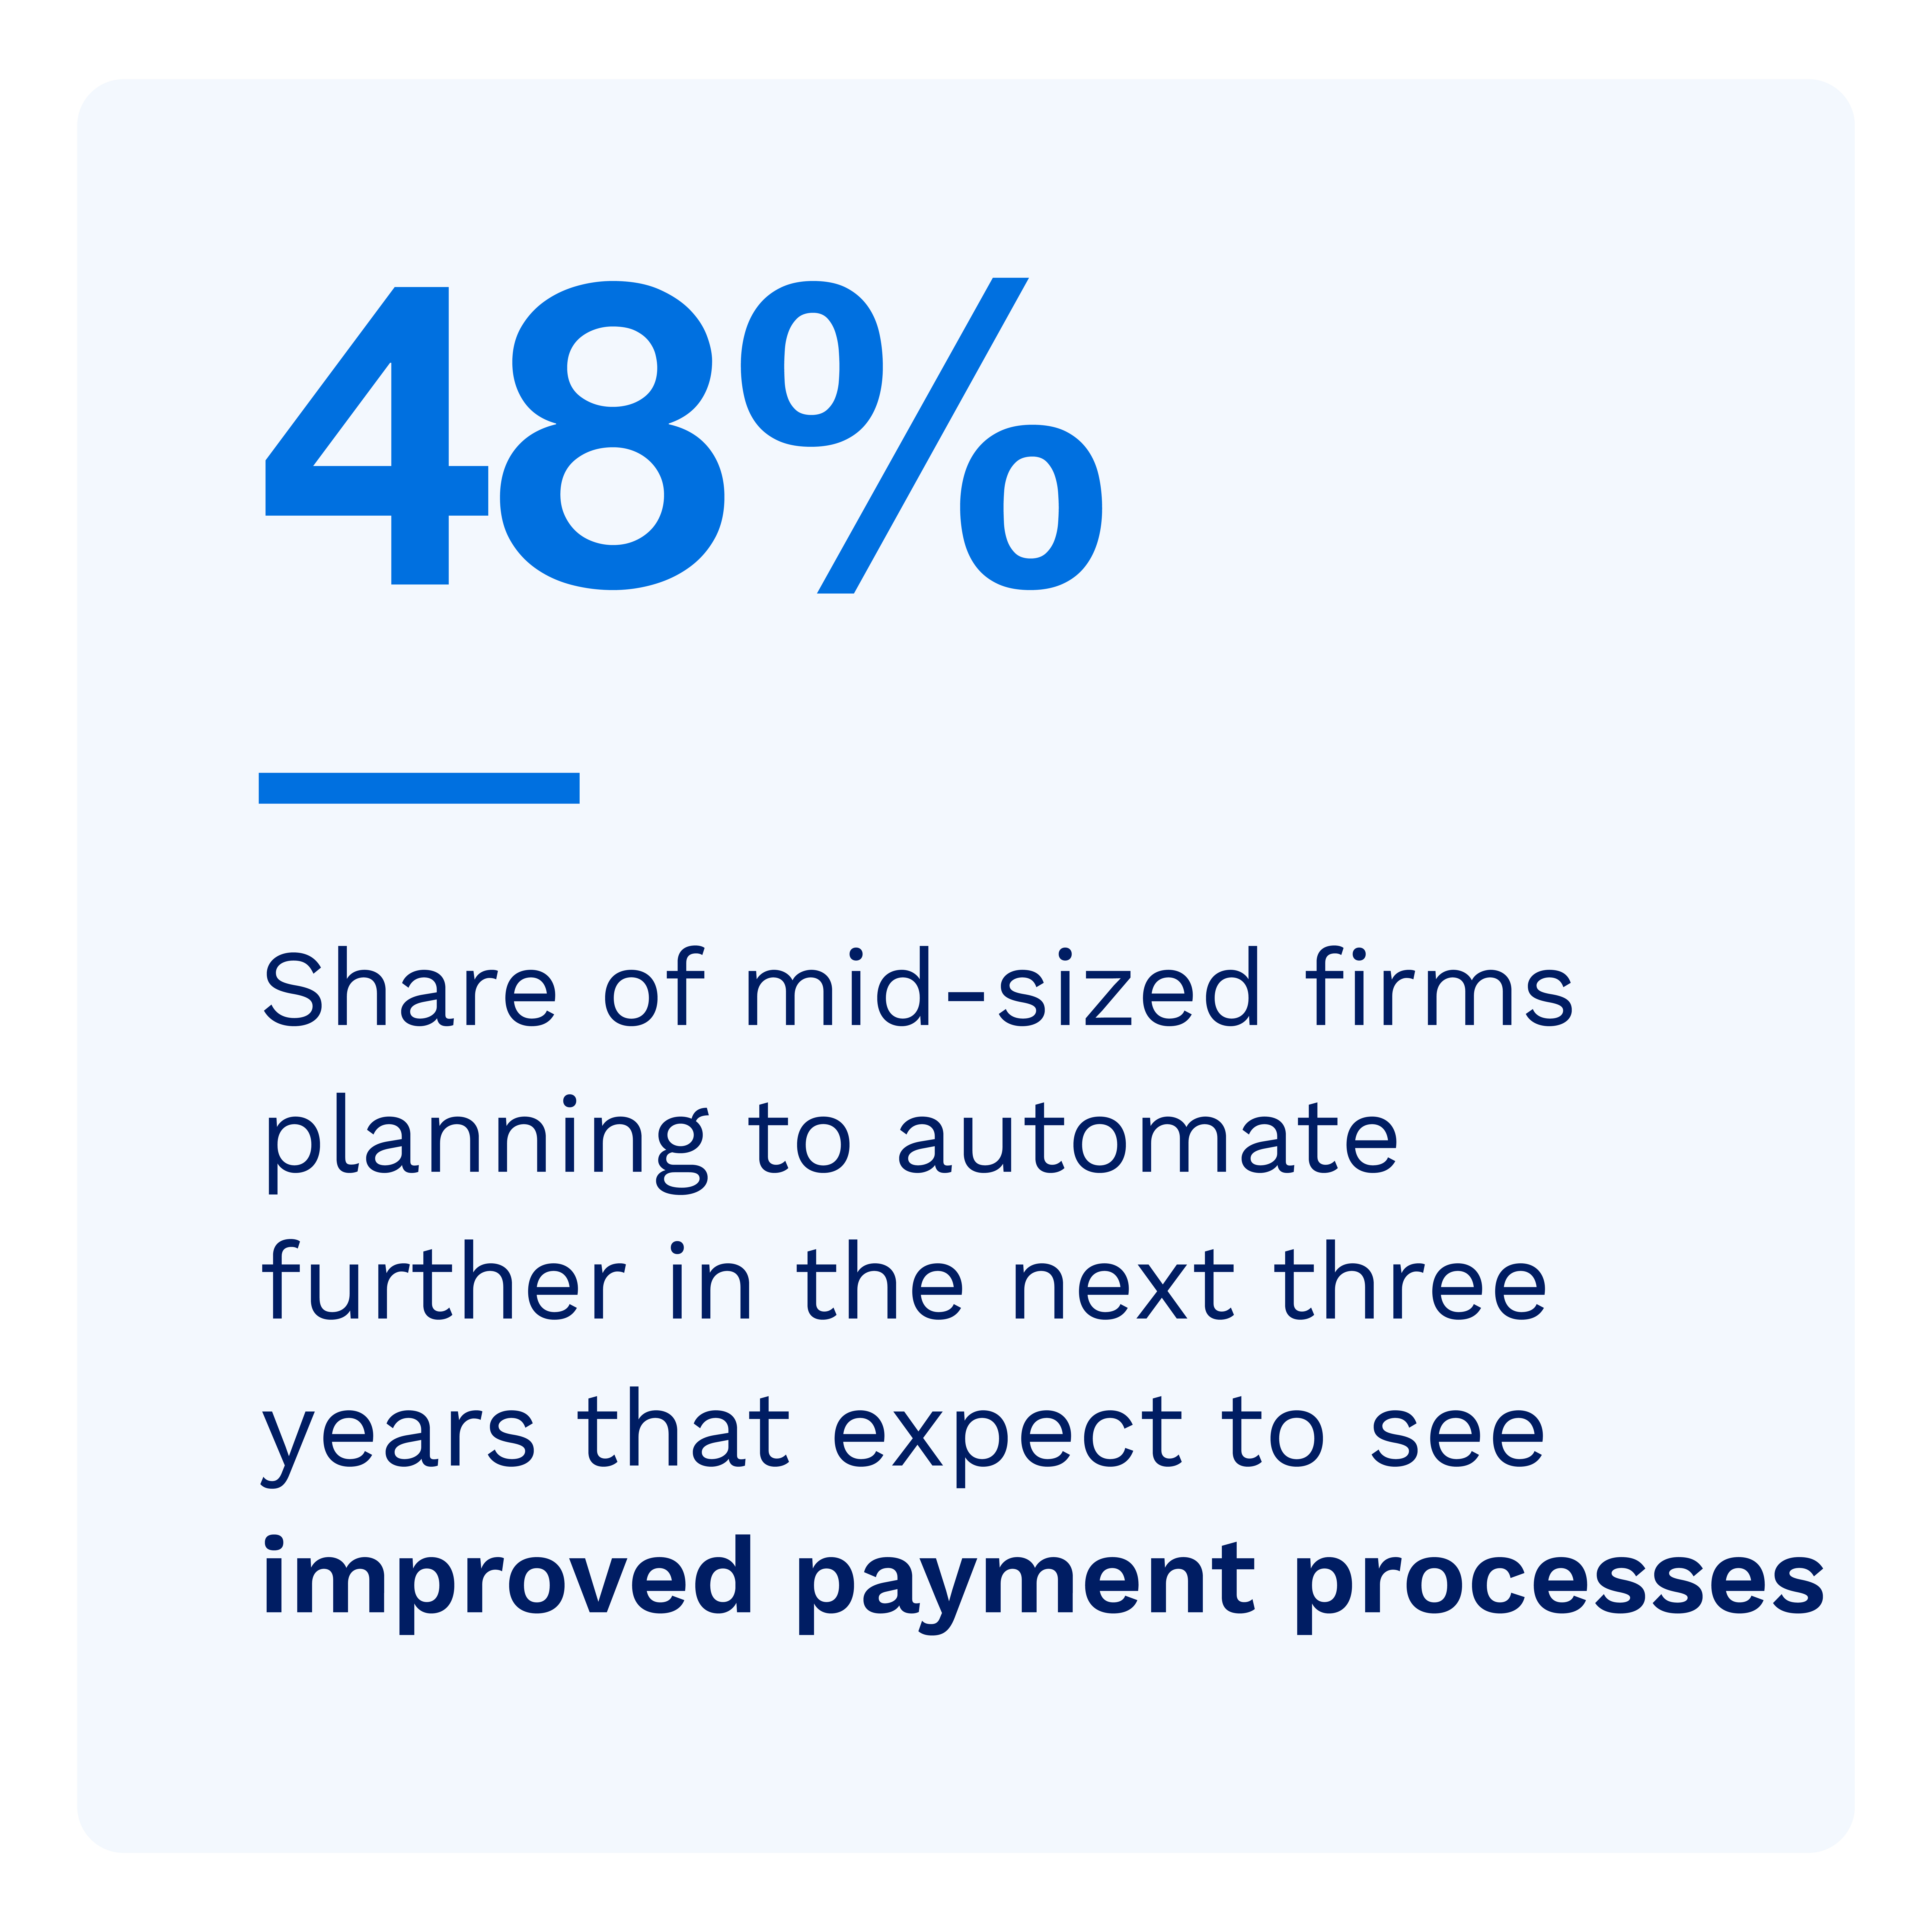 48%: Share of mid-sized firms planning to automate further in the next three years that expect to see improved payment processes